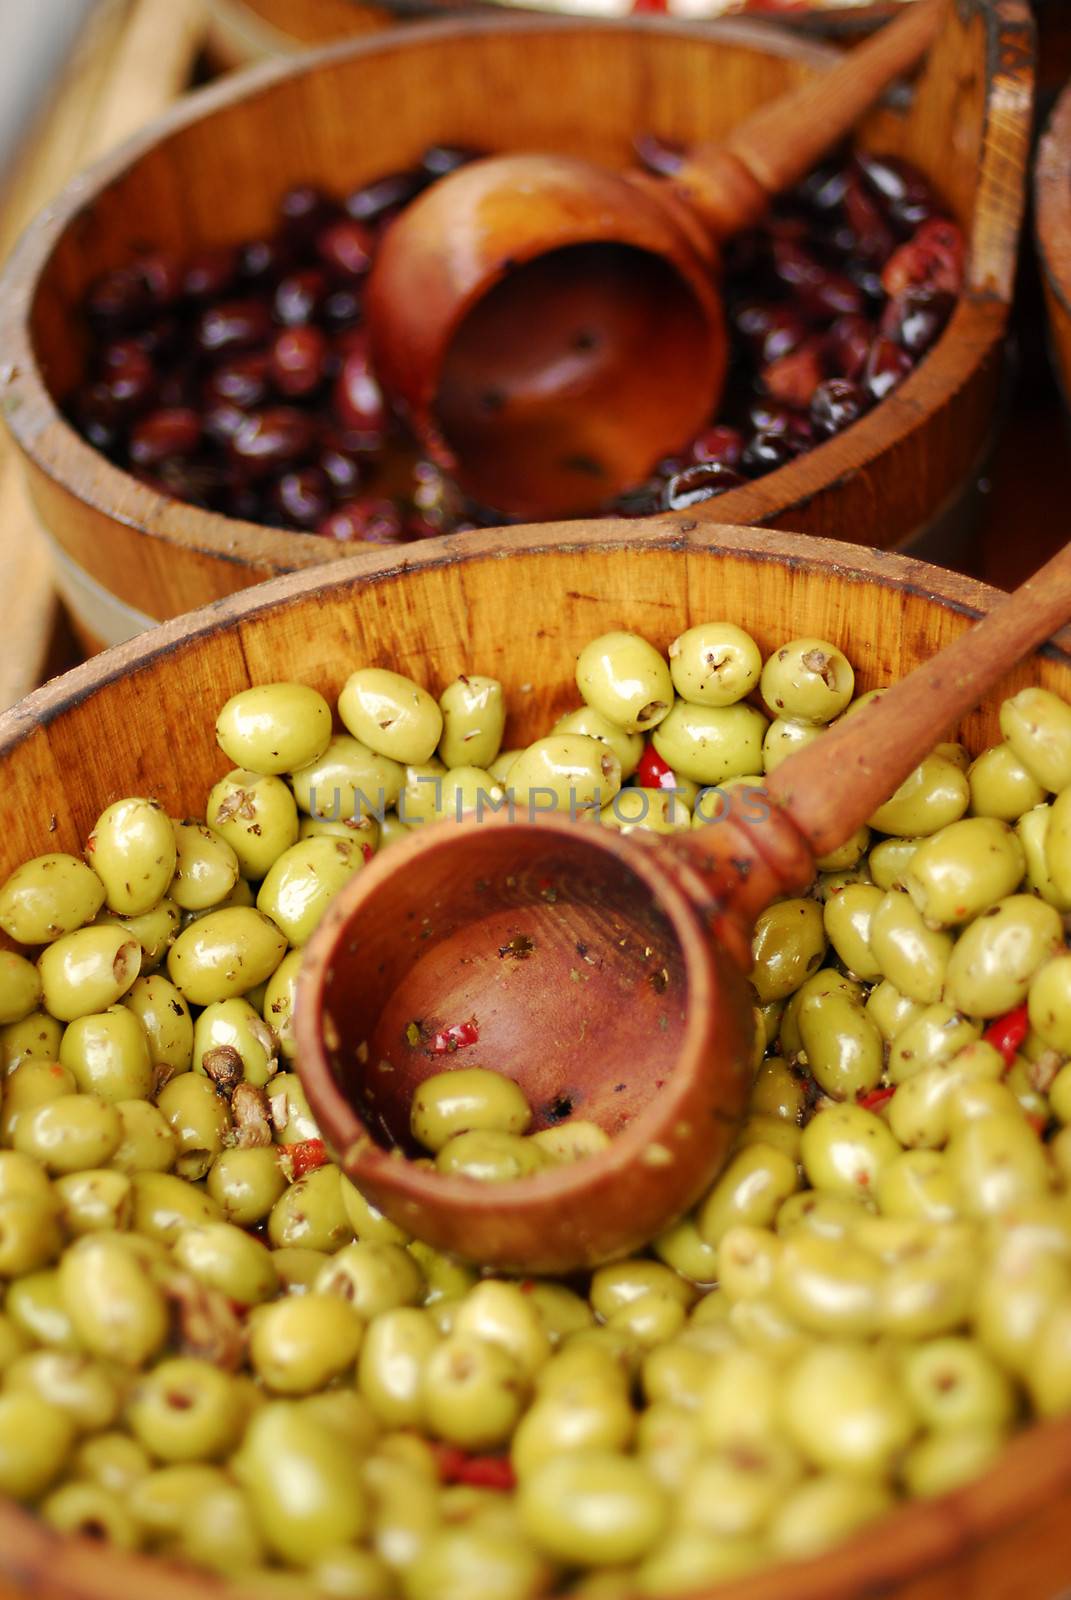 Variety of olives being sold at a market by stockyimages